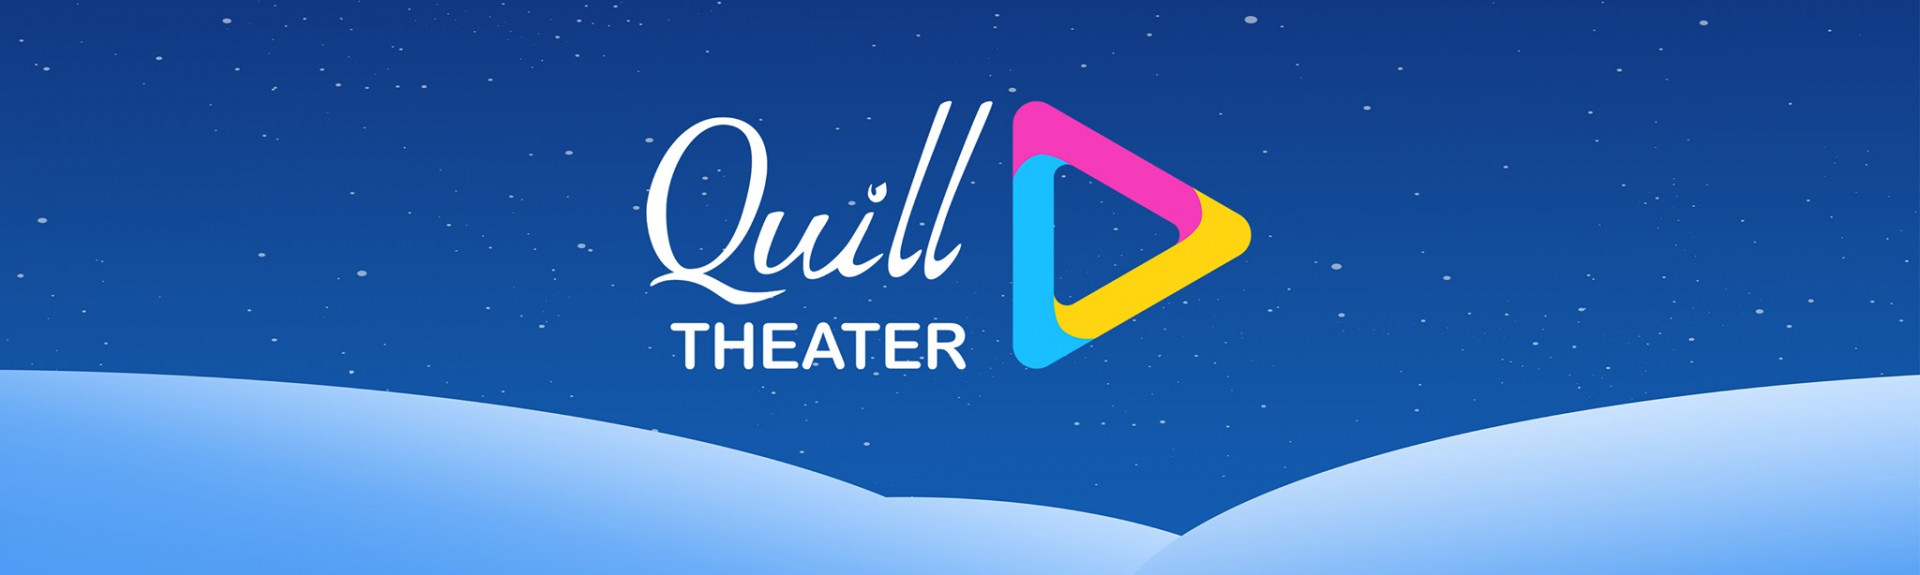 Quill Theater